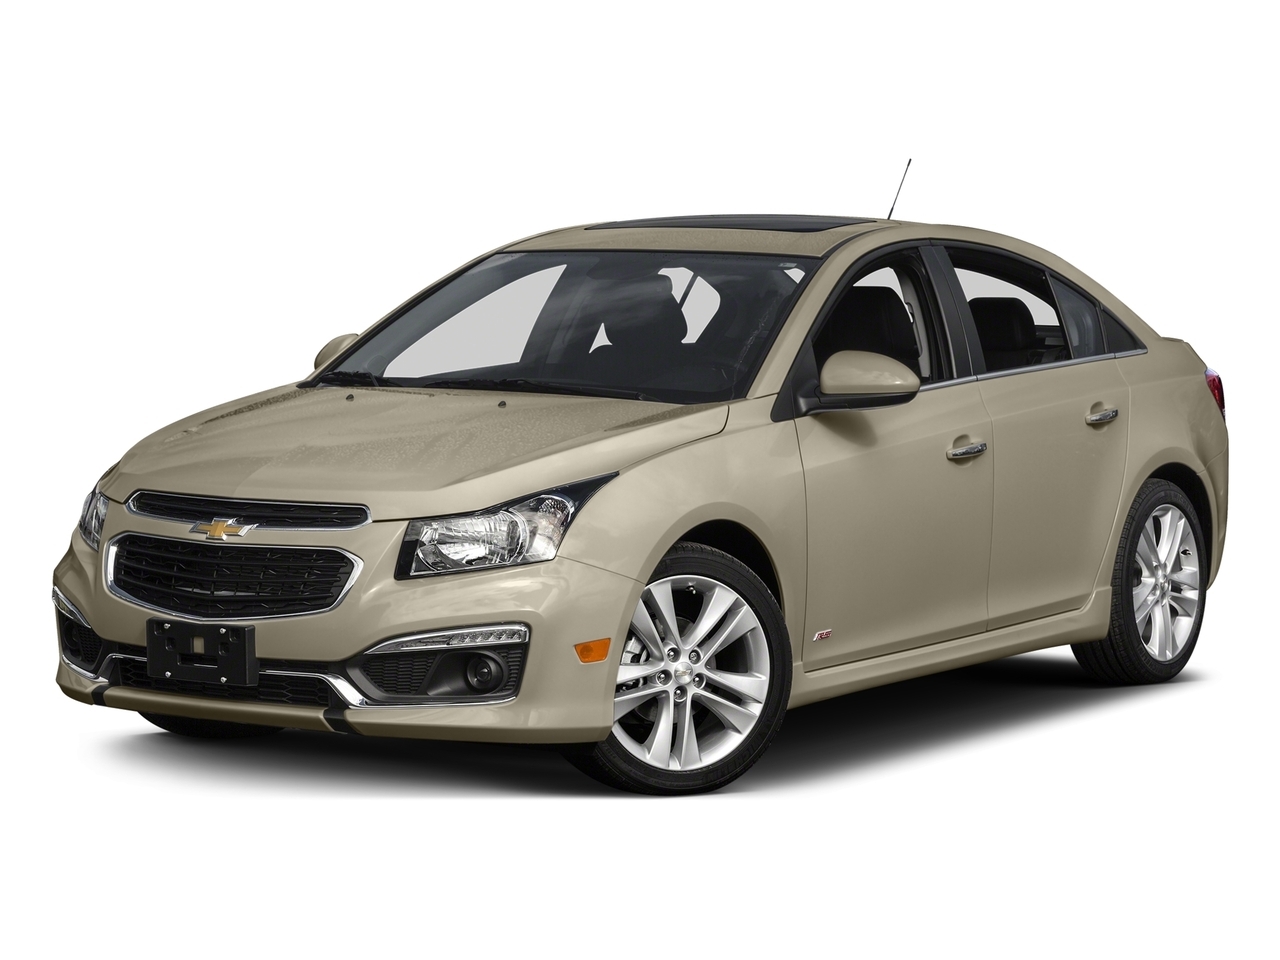 2015 Chevrolet Cruze AS - IS